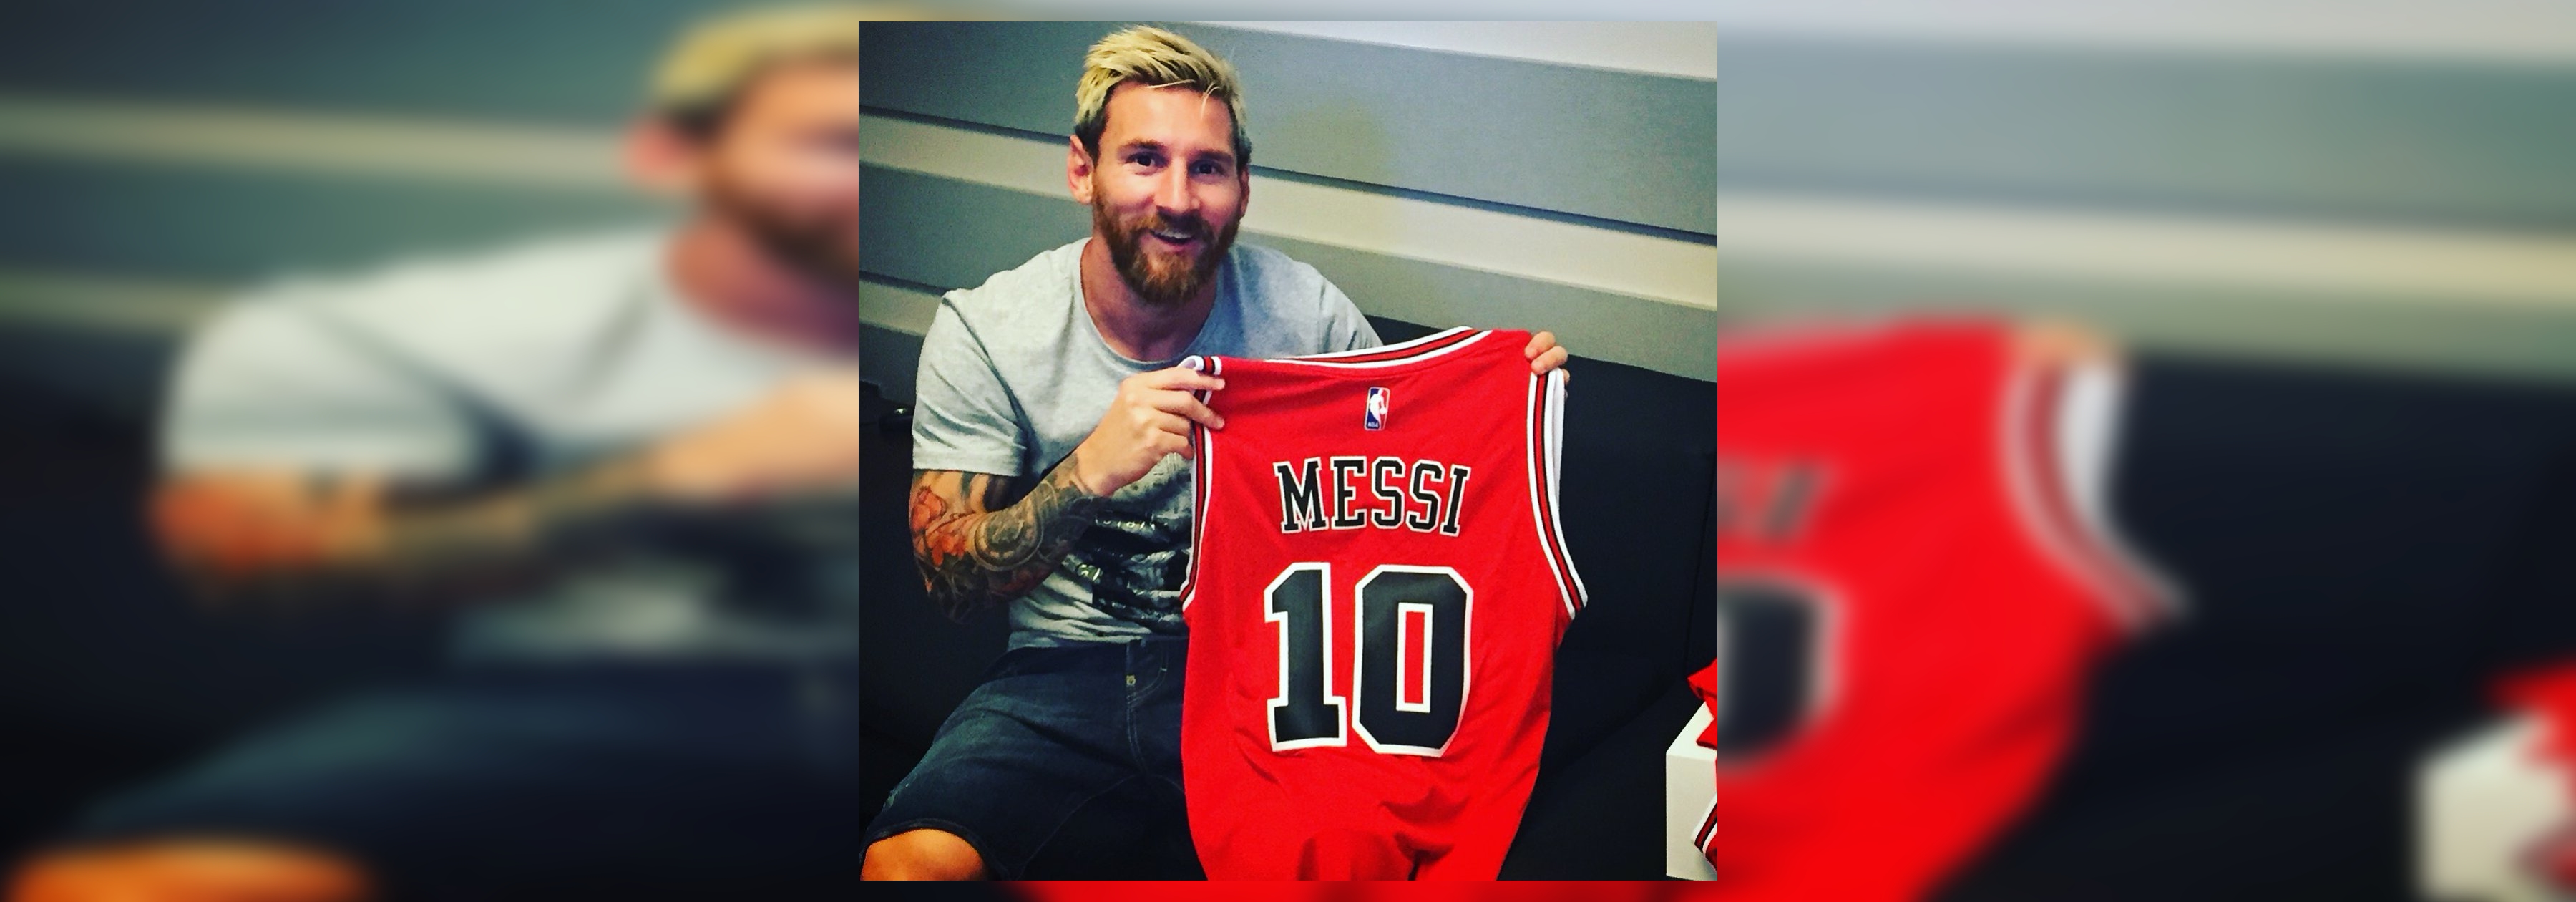 Messi presented with customised Chicago Bulls jersey